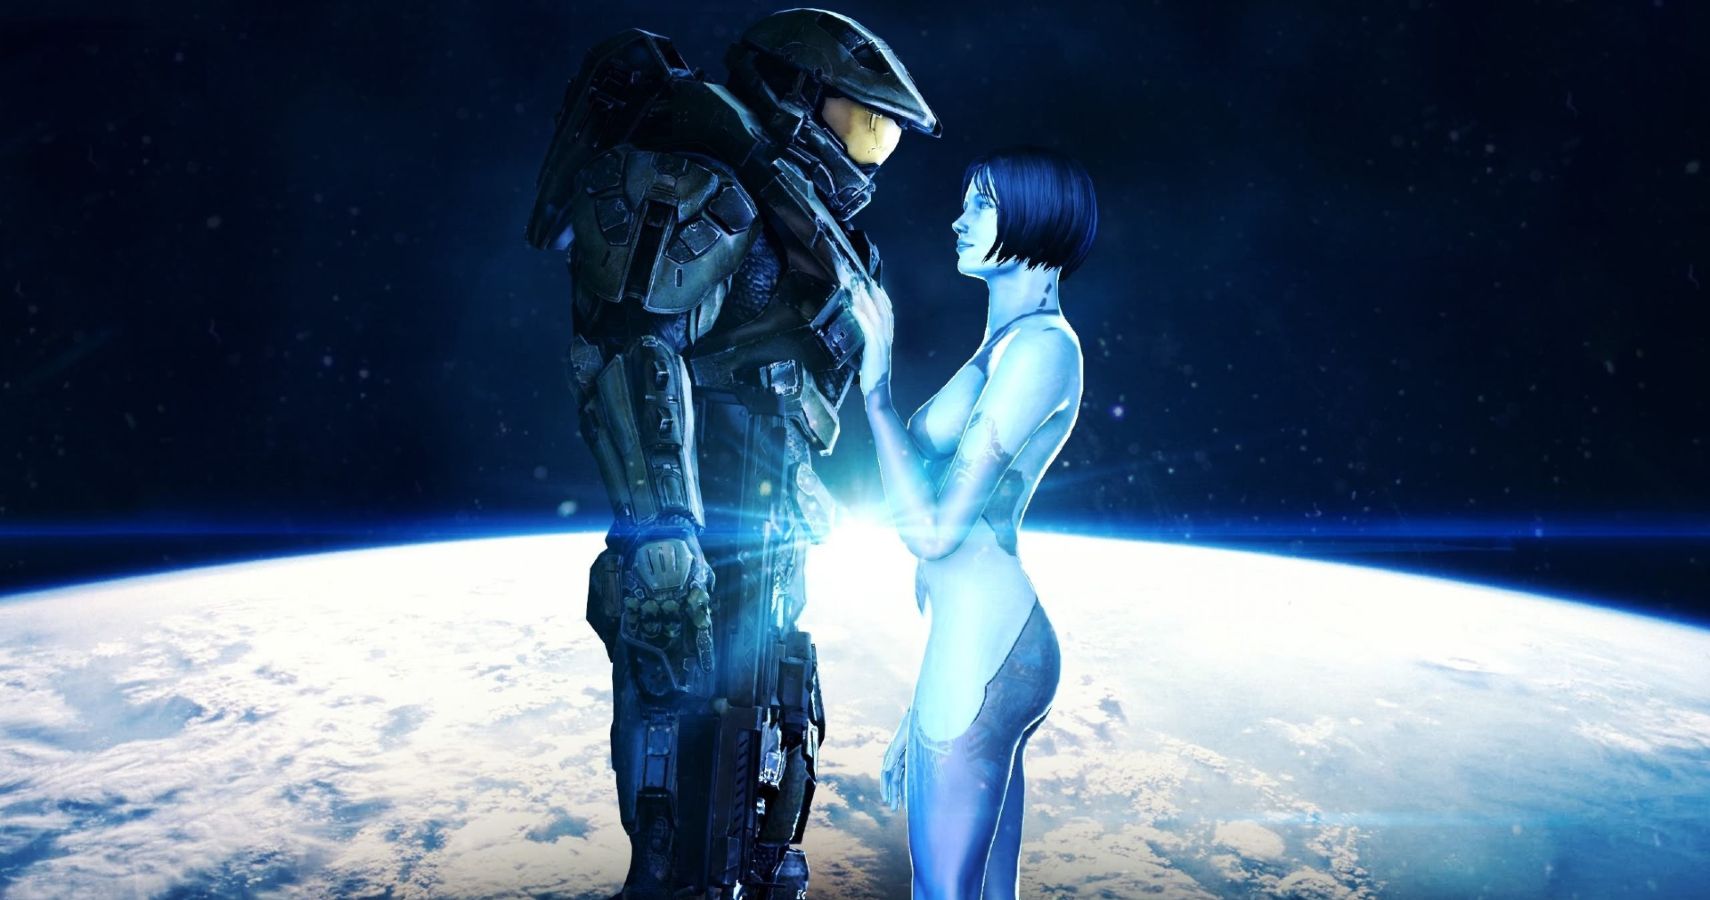 Master Chief and Cortana from the Halo series.